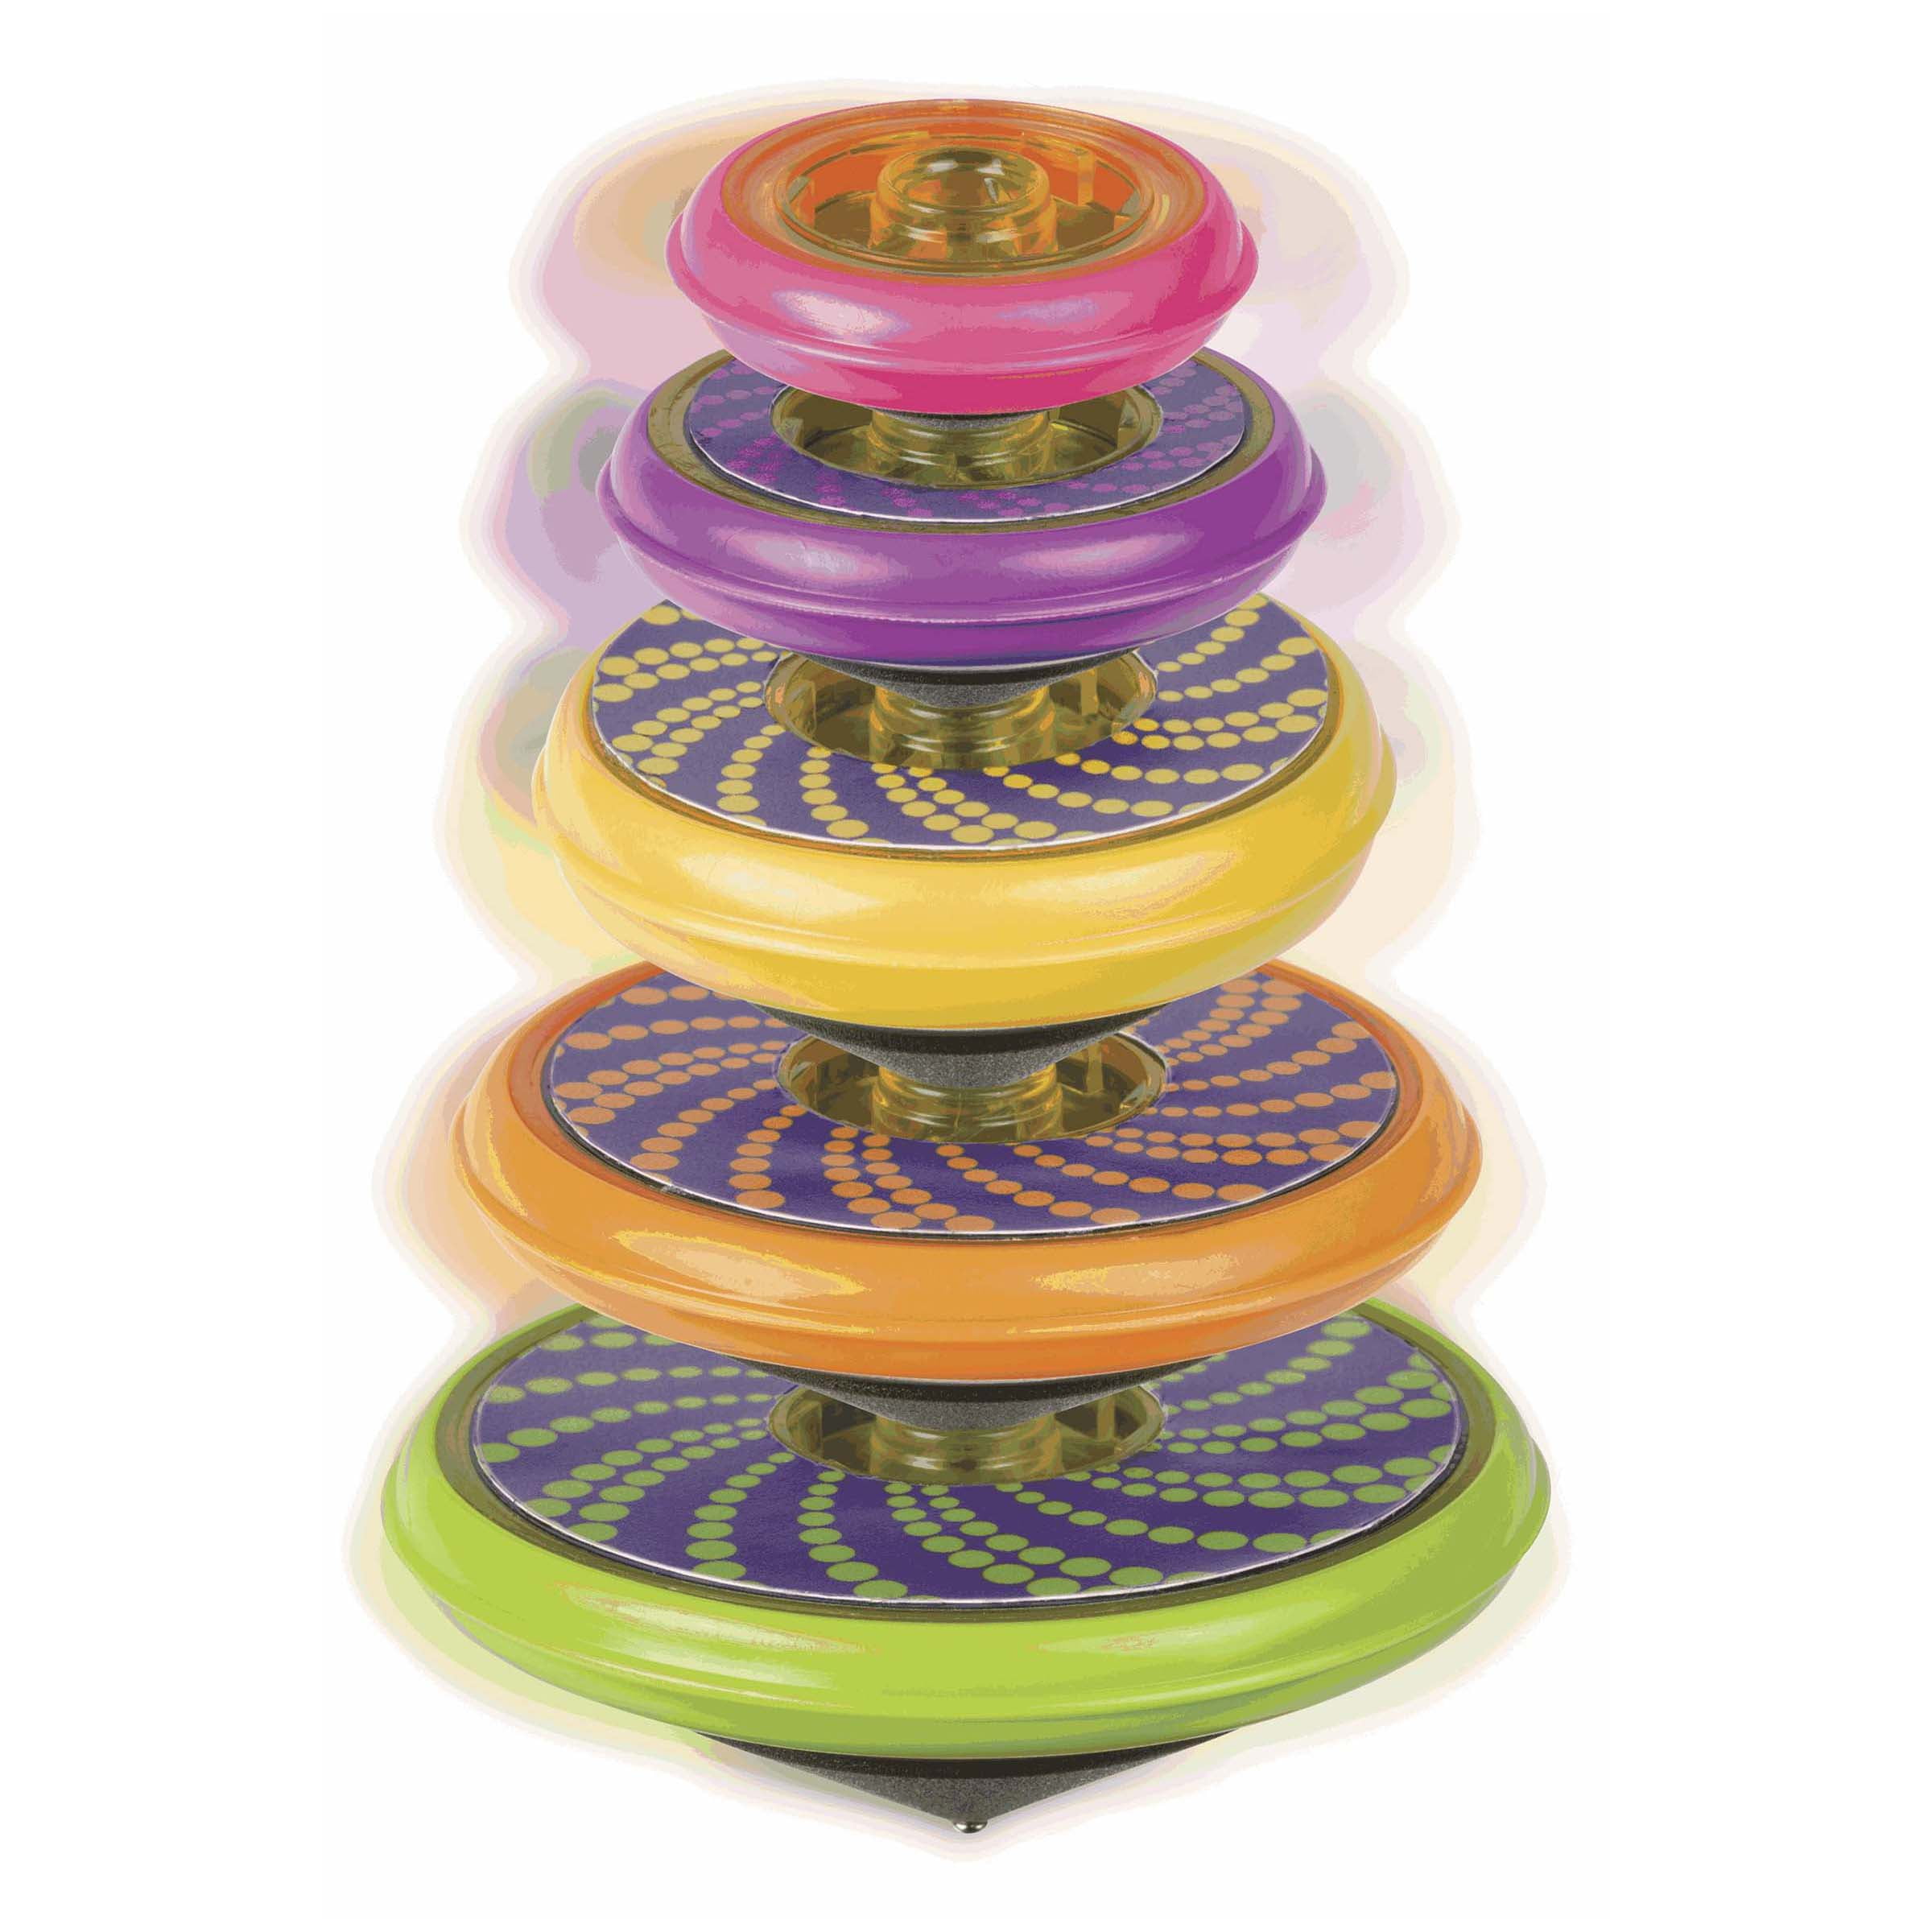 Toysmith Super Stacking Tops Kit from Little Folks 